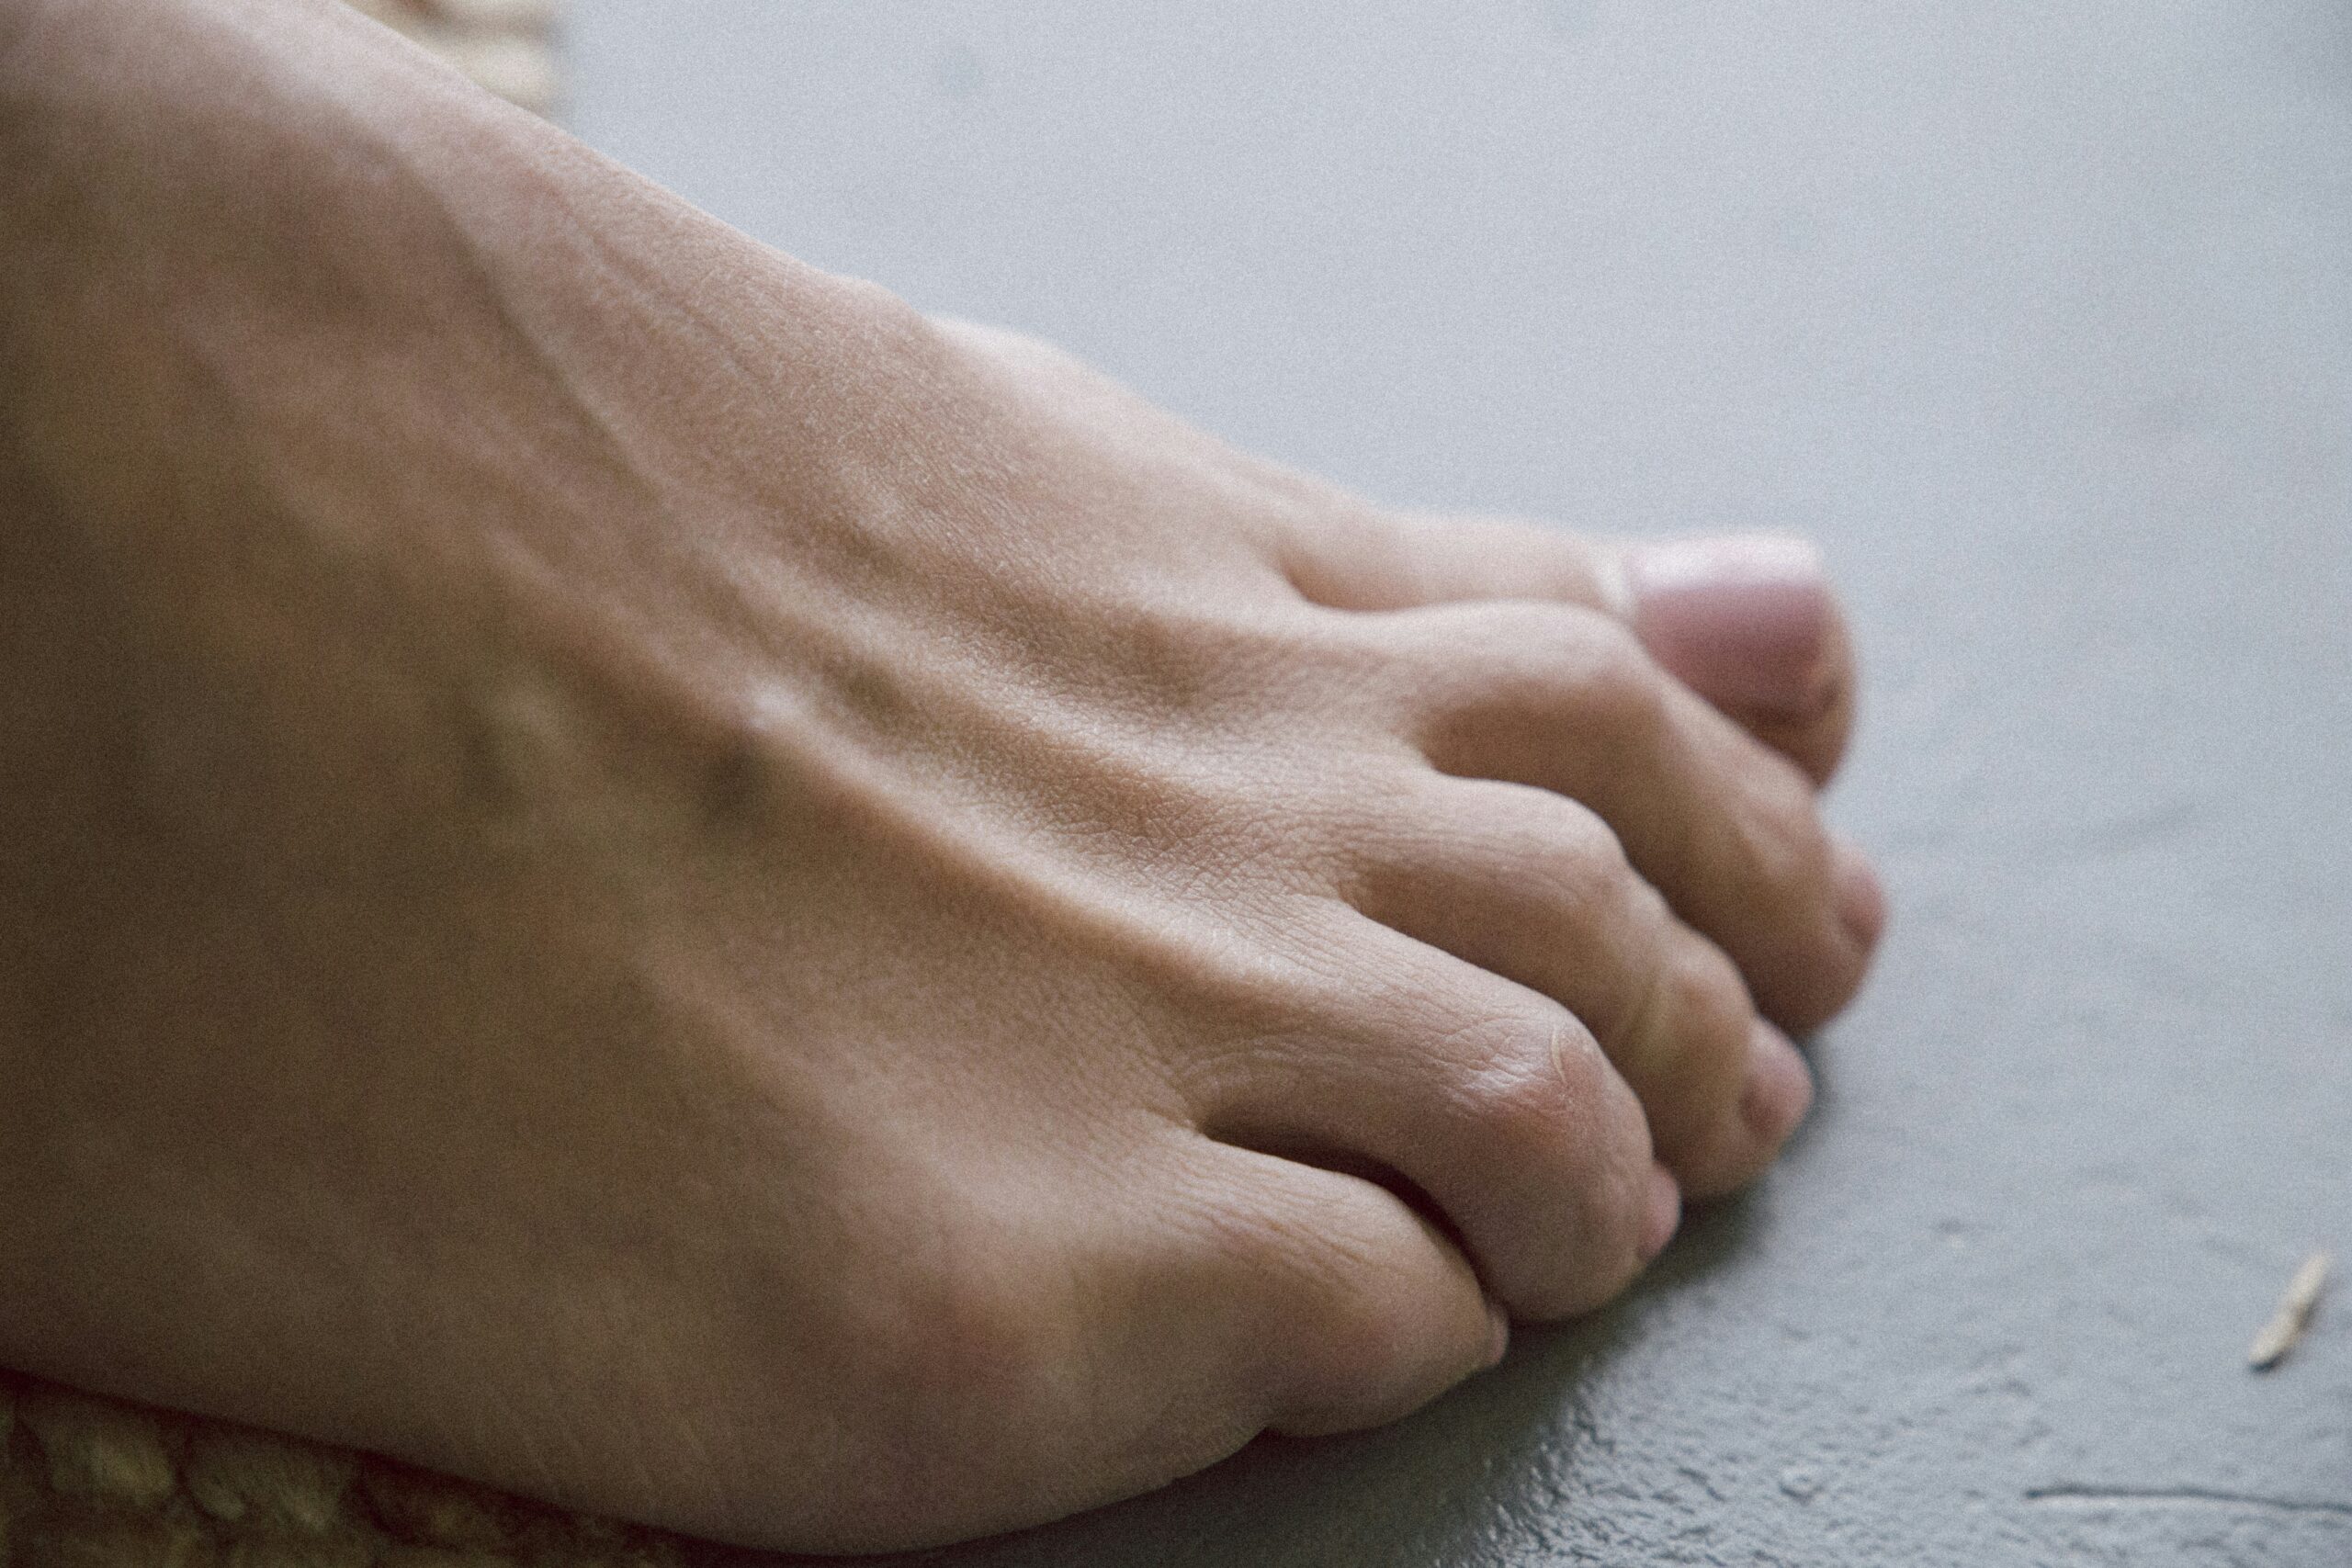 Toenail Fungus: What Is, Causes, Treatment, and Prevention